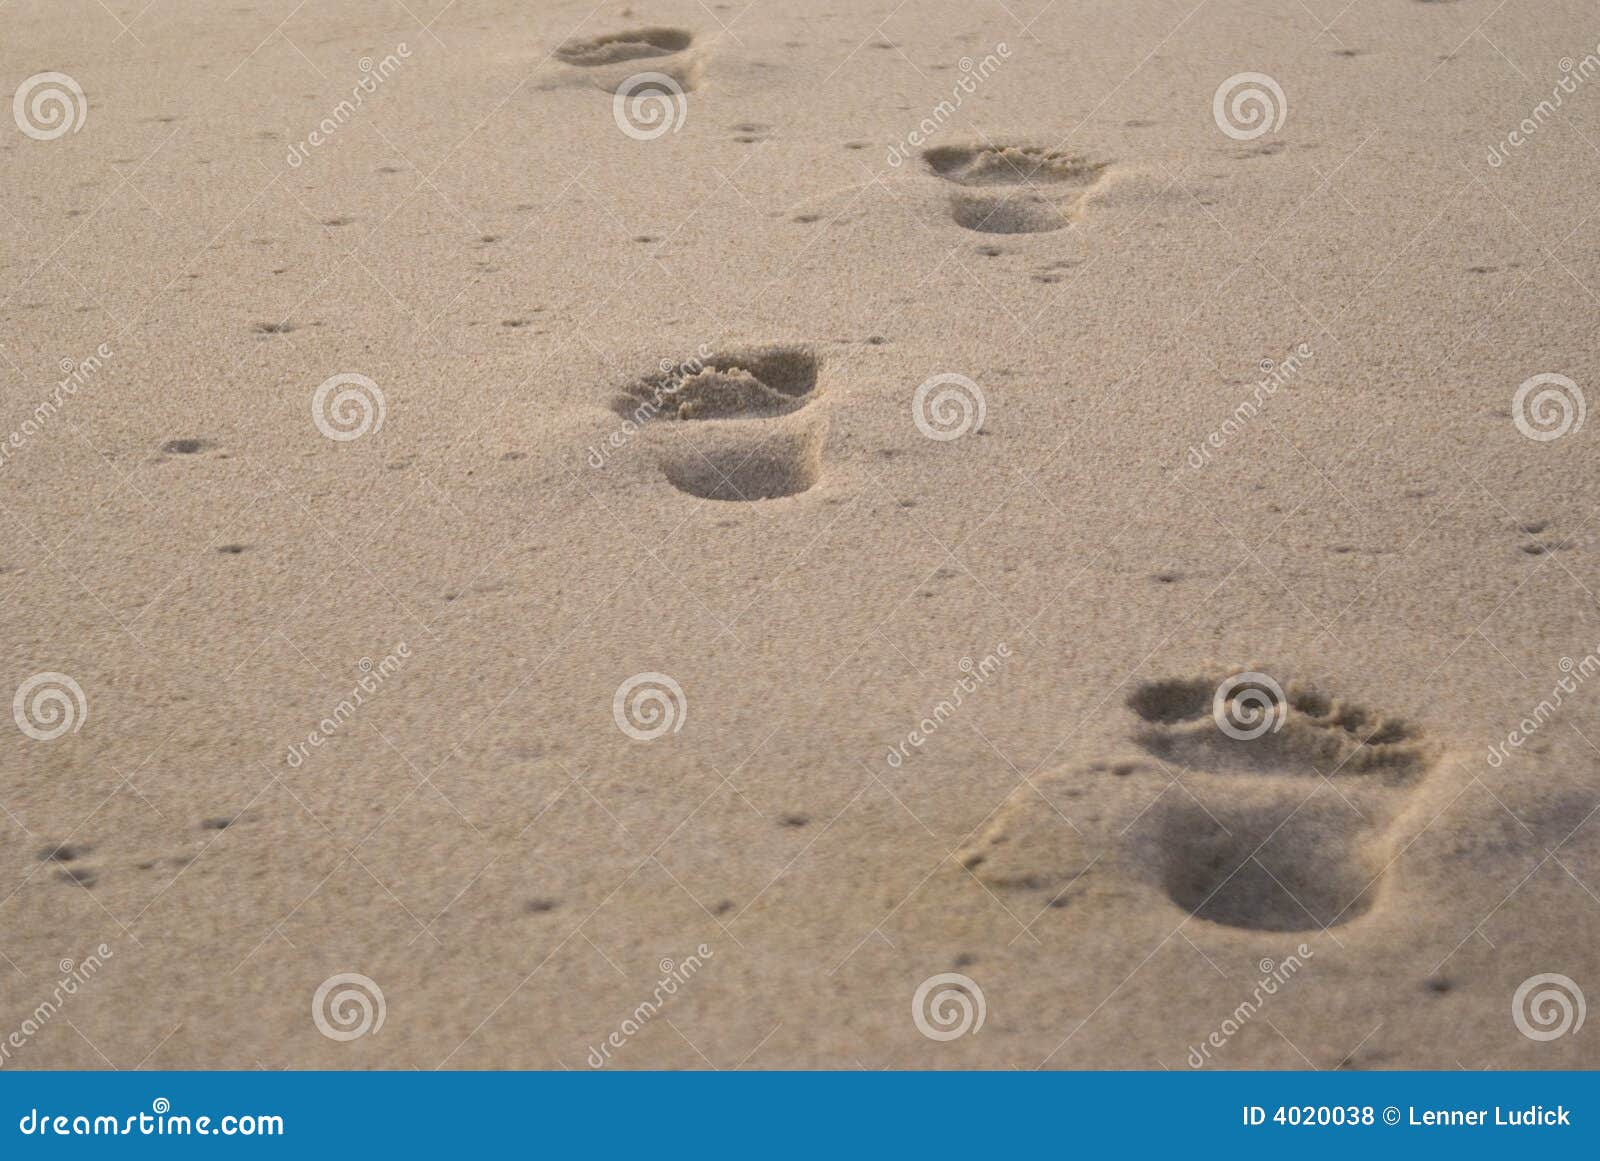 solitary footprints in sand